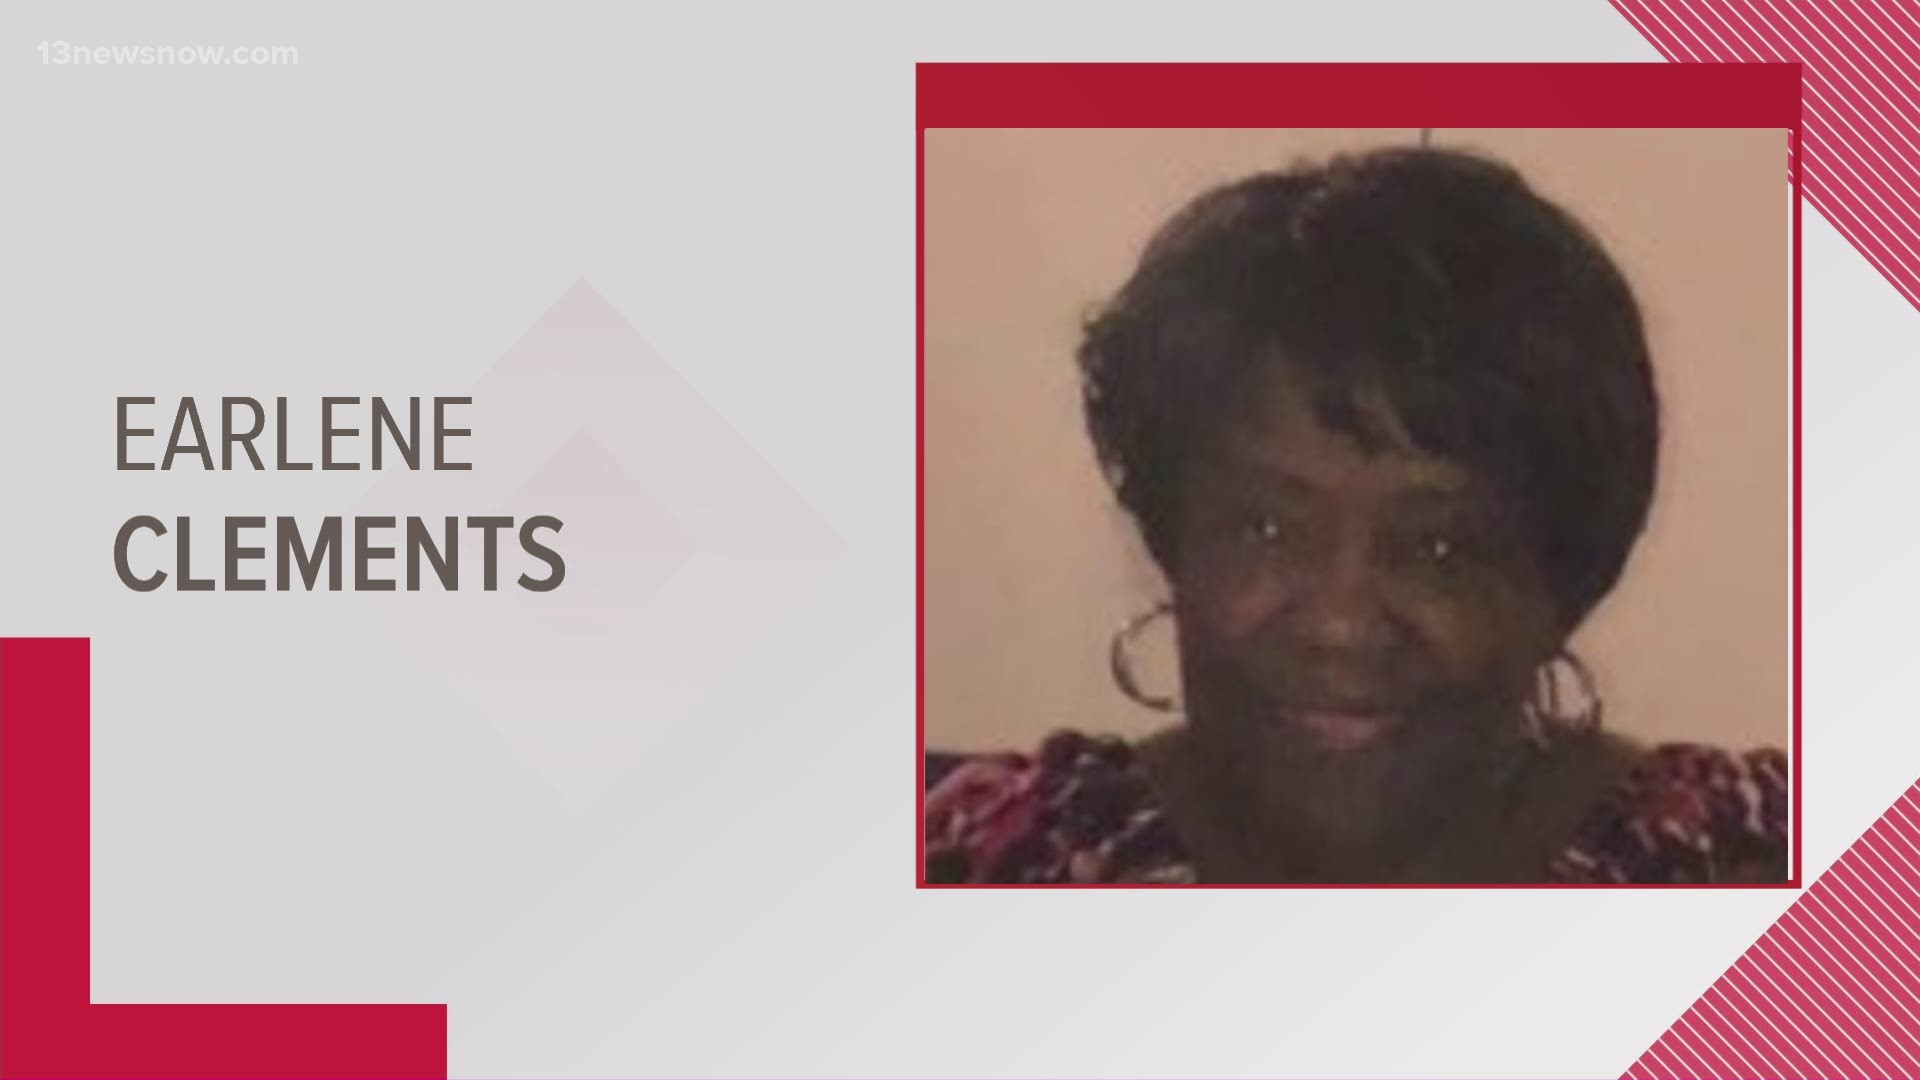 Earlene Clements was last seen driving in her vehicle in the 1200 block of London Boulevard around 6:30 p.m. She left home without her medications.